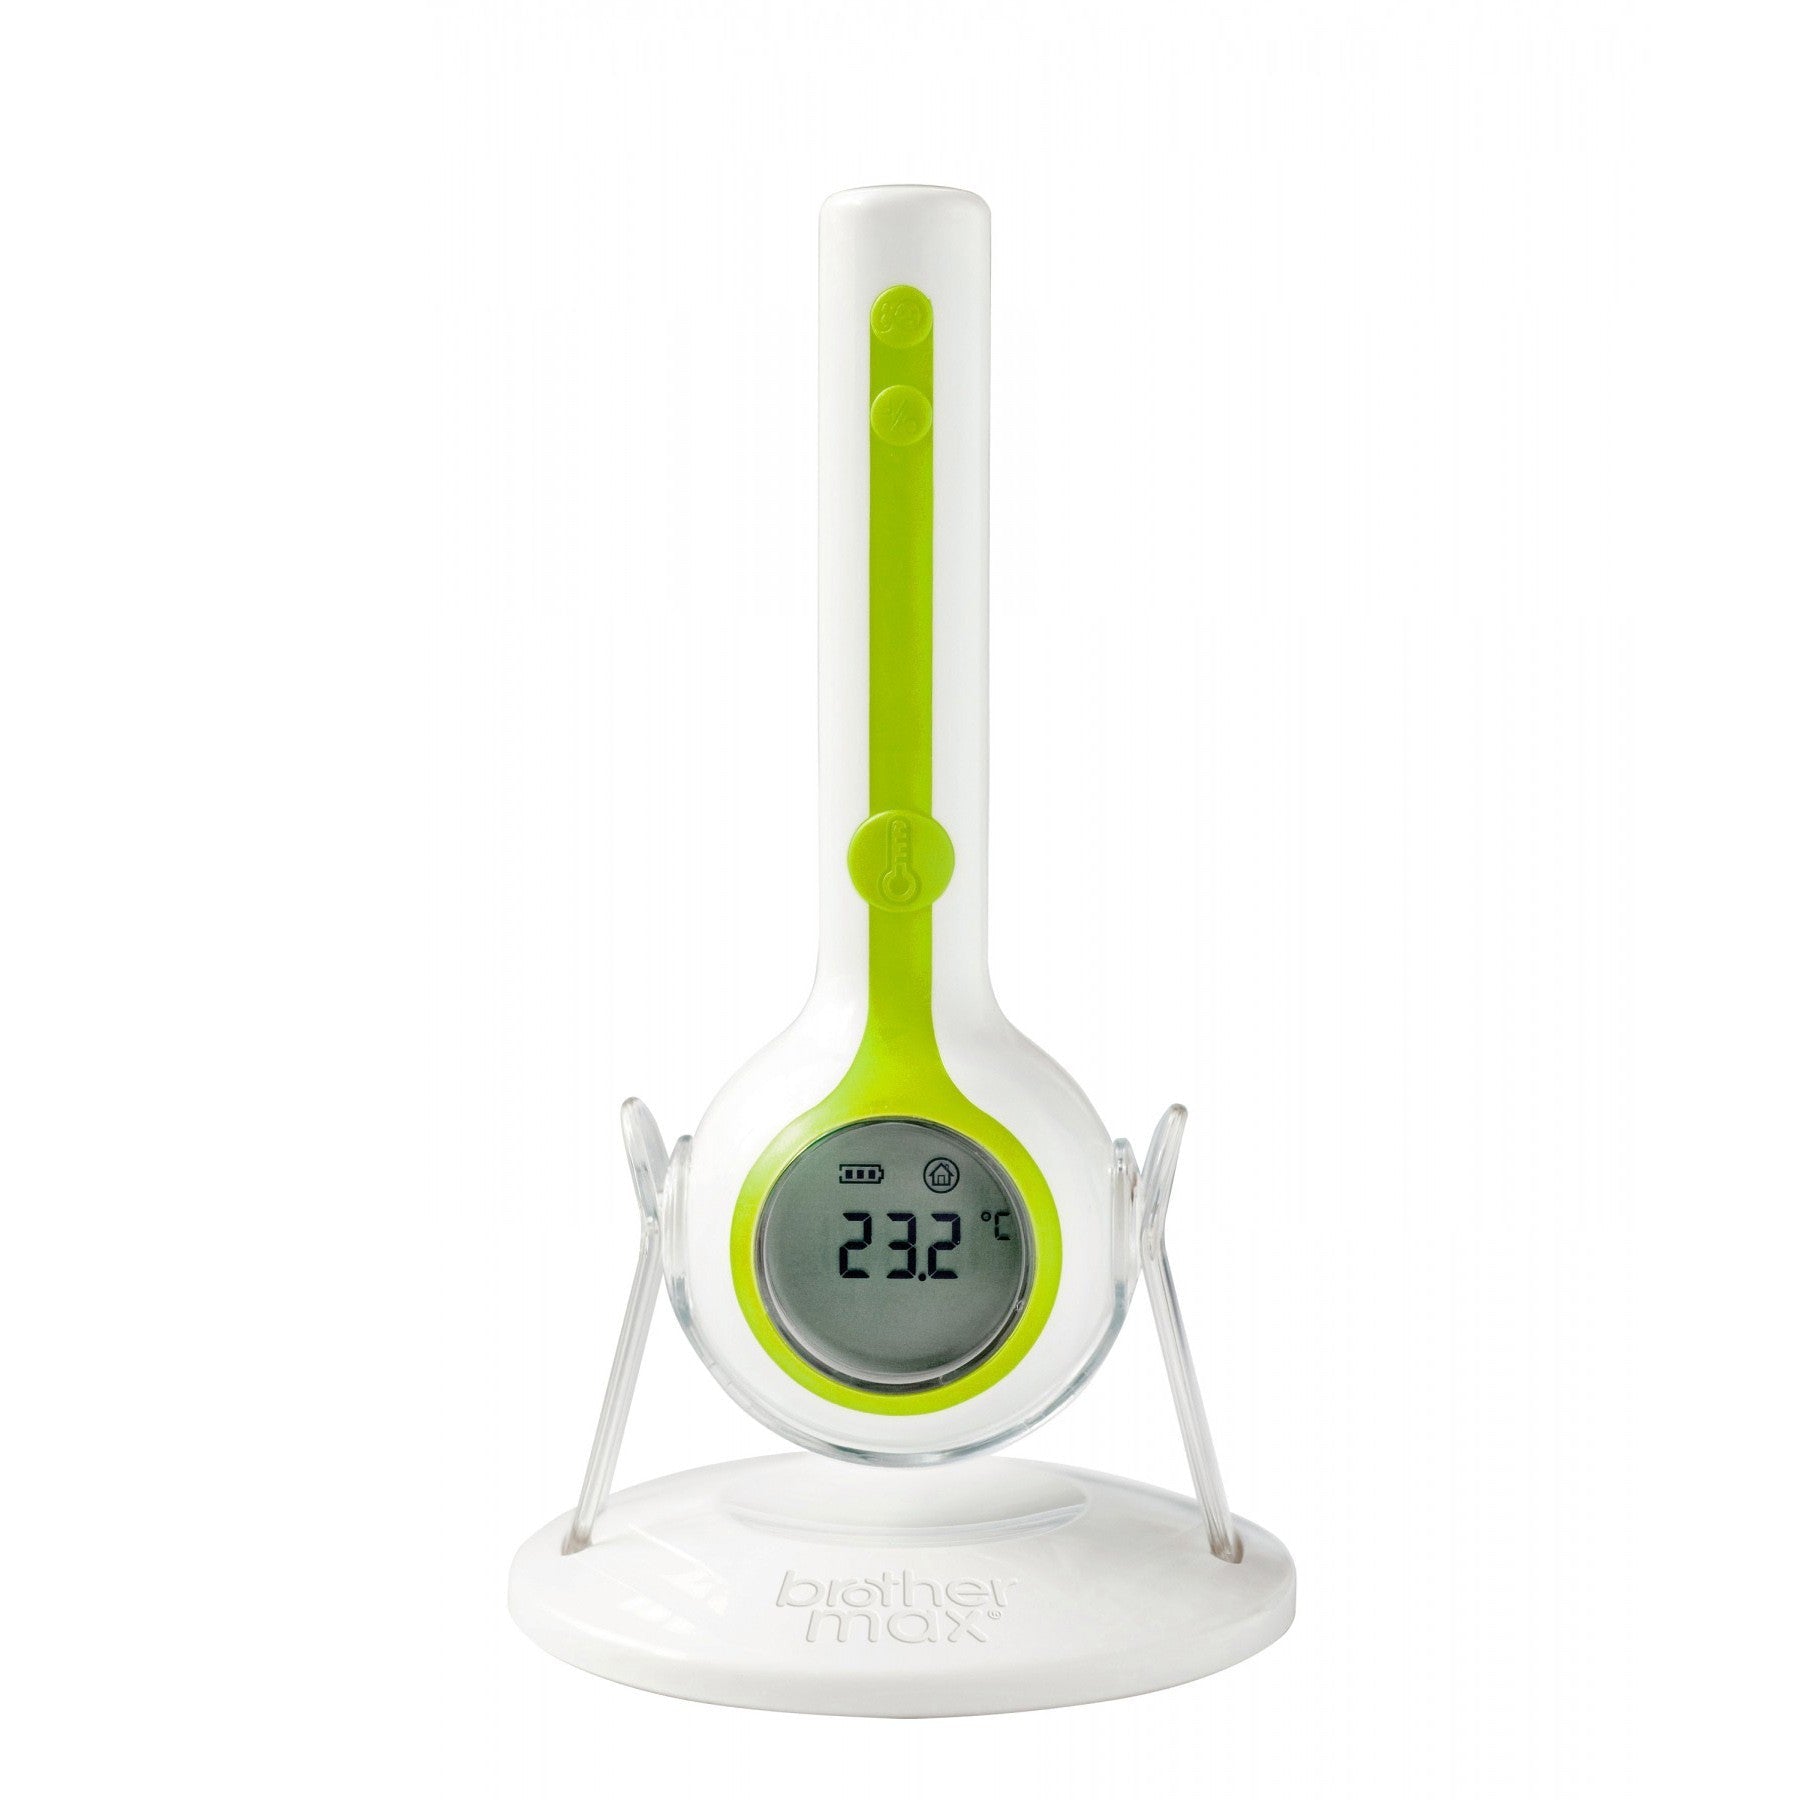 Brother Max 3 in 1 Digital Thermometer